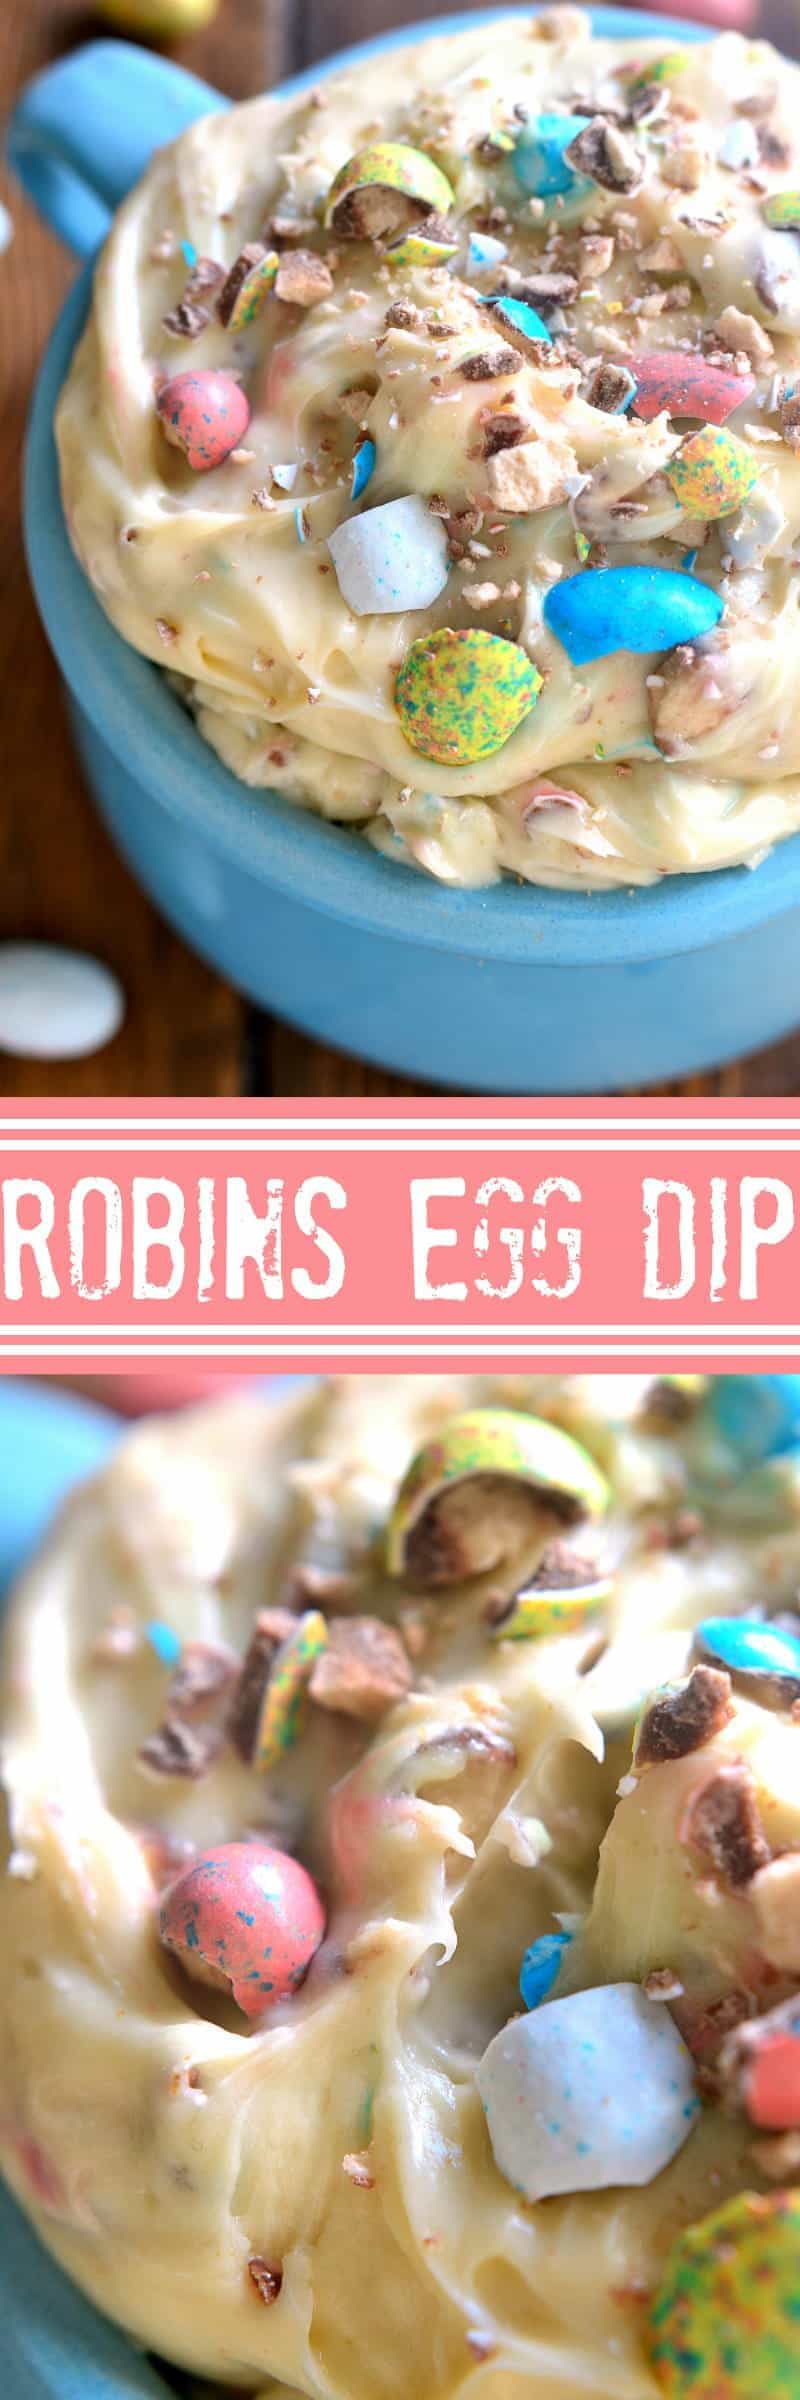 This Robins Egg Dip is smooth, creamy, and filled with the delicious flavor of malted milk balls. The perfect last minute addition to your Easter menu....and a great way to use up your leftover candy!